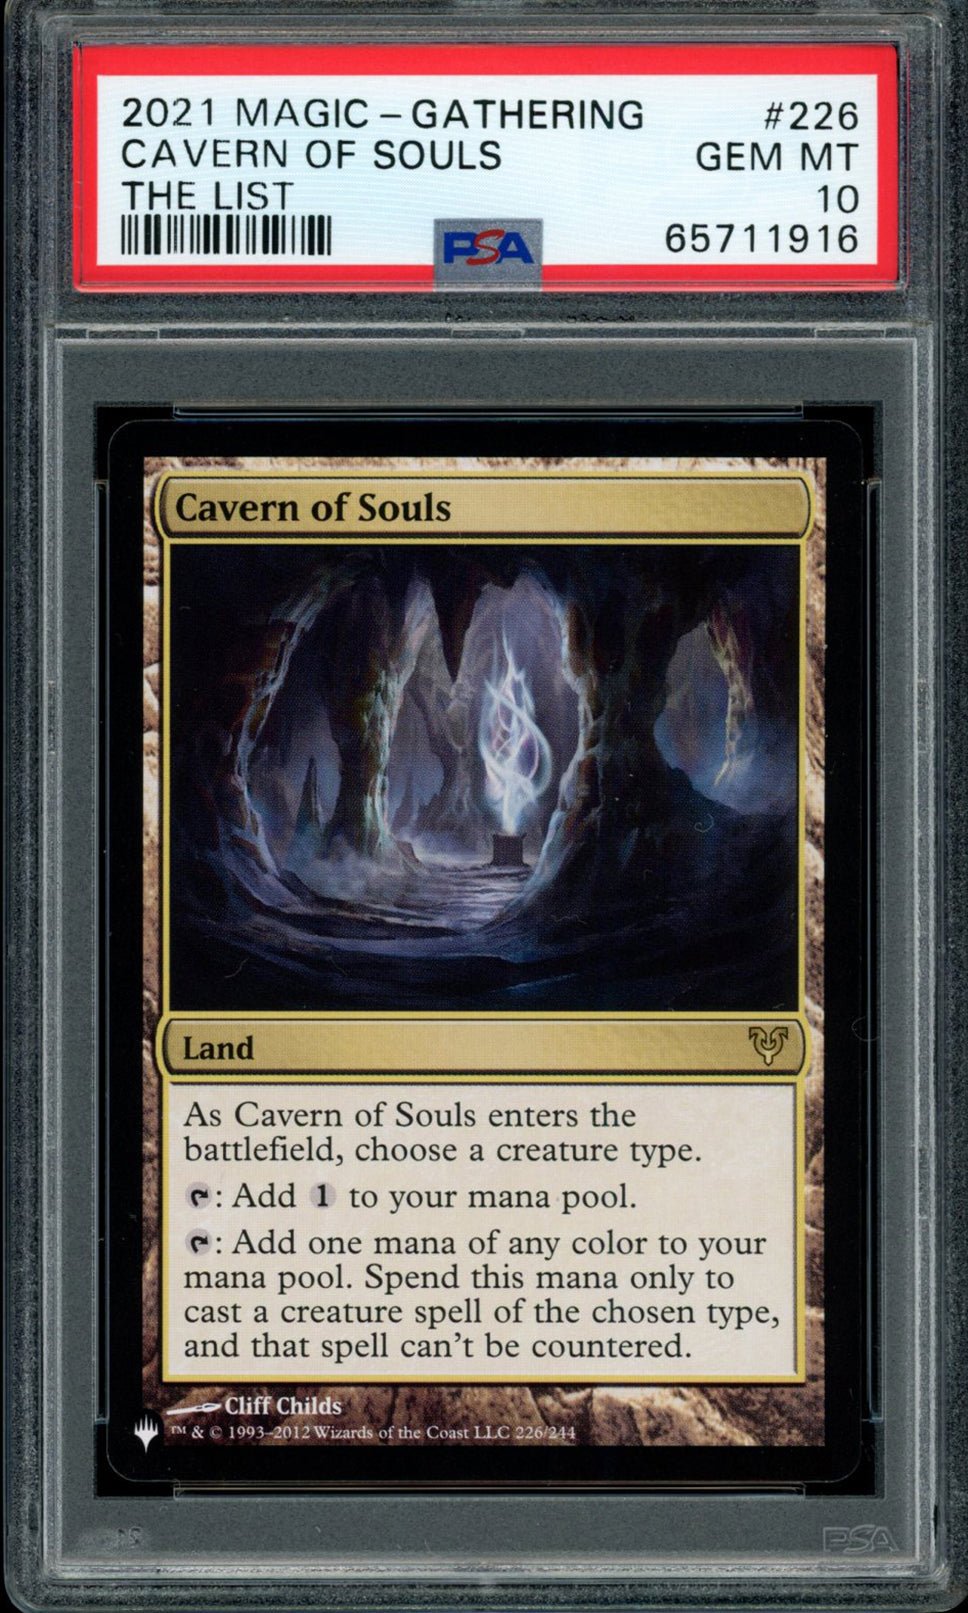 CAVERN OF SOULS PSA 10 2021 The List Magic the Gathering 226 Magic the Gathering Base Graded Cards - Hobby Gems